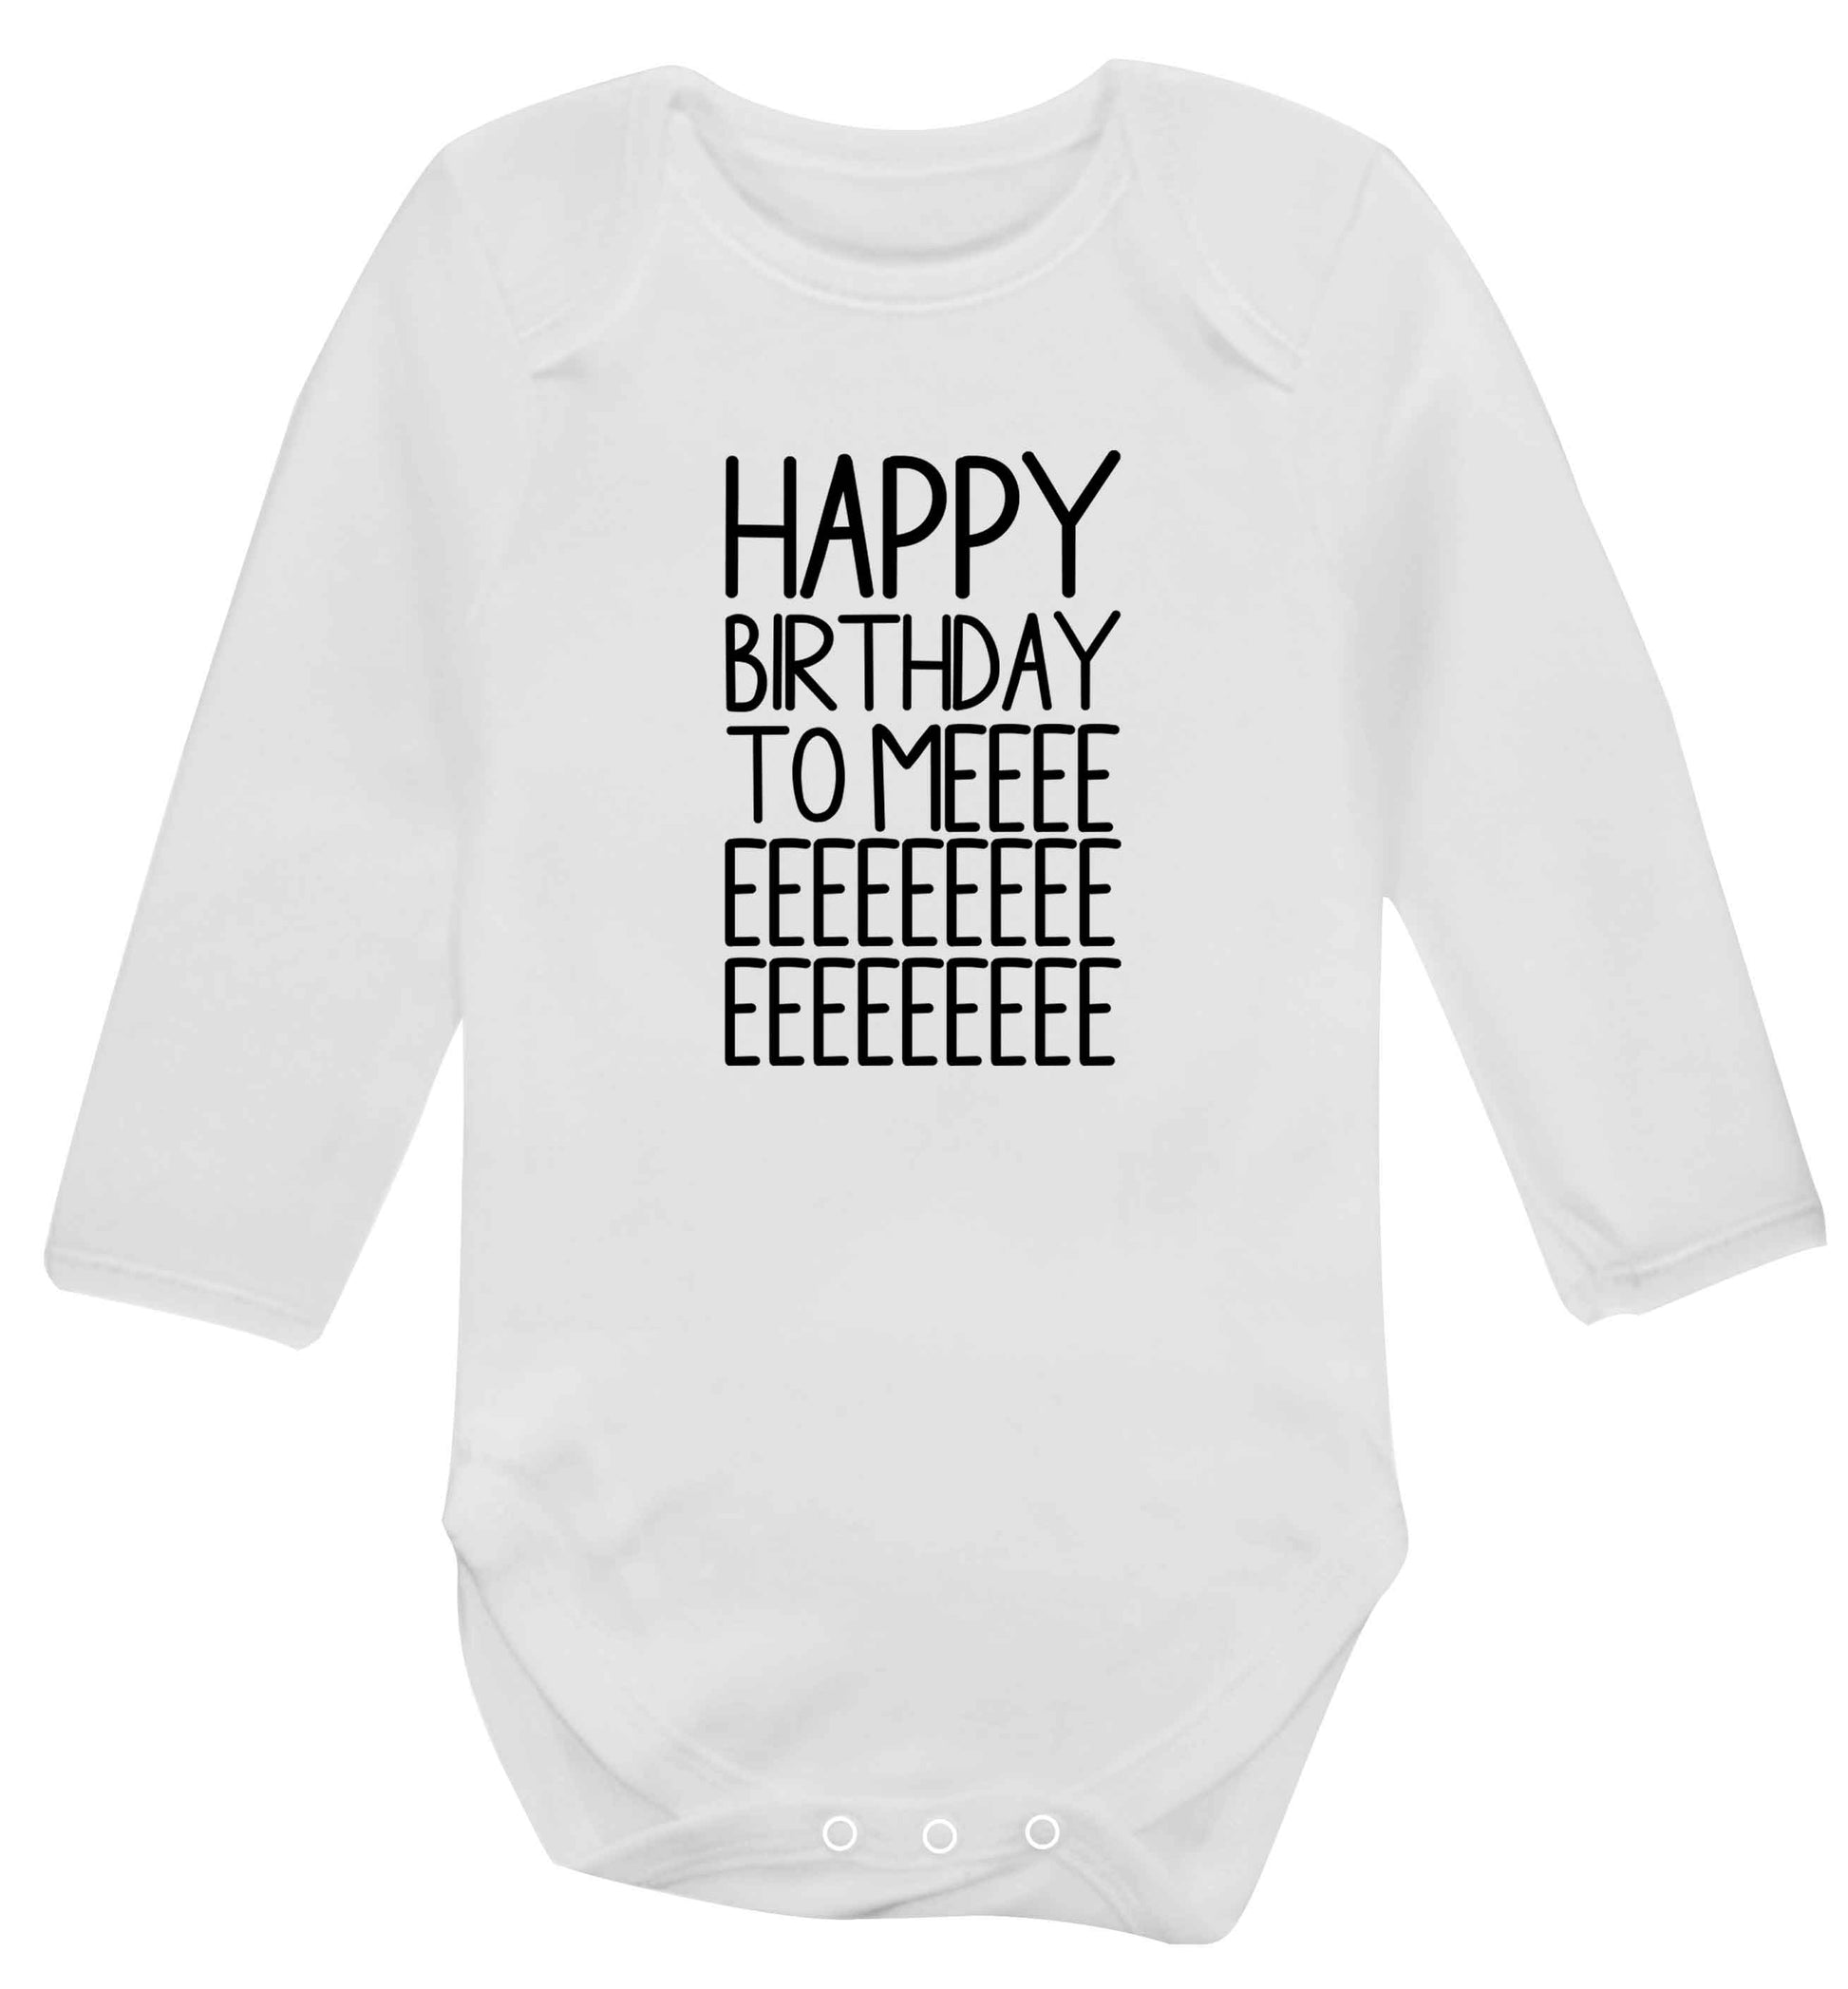 Happy birthday to me baby vest long sleeved white 6-12 months